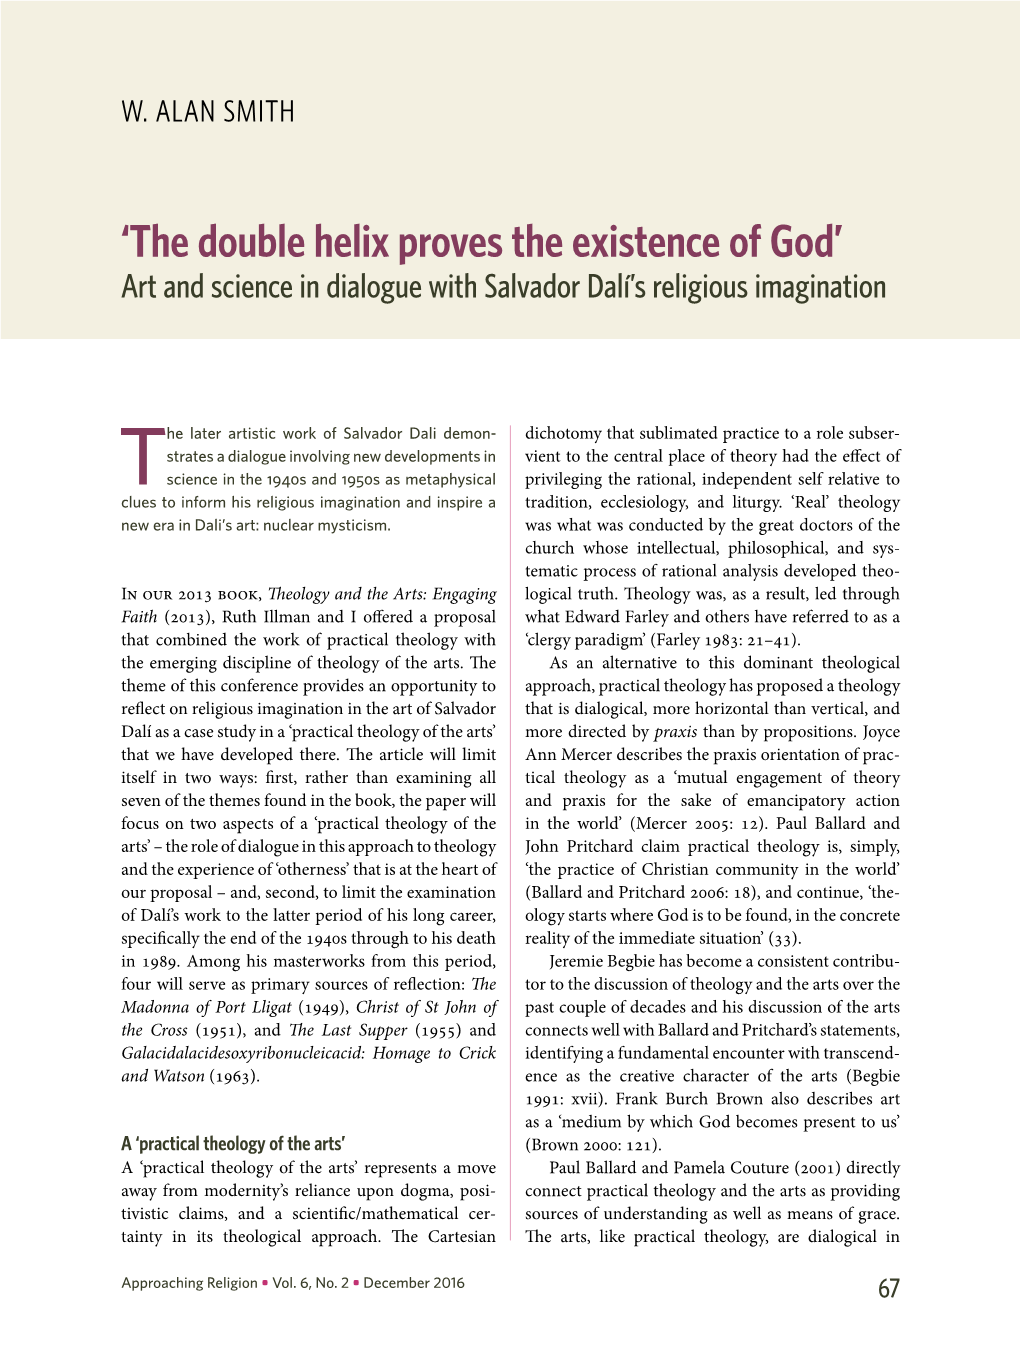 'The Double Helix Proves the Existence of God'